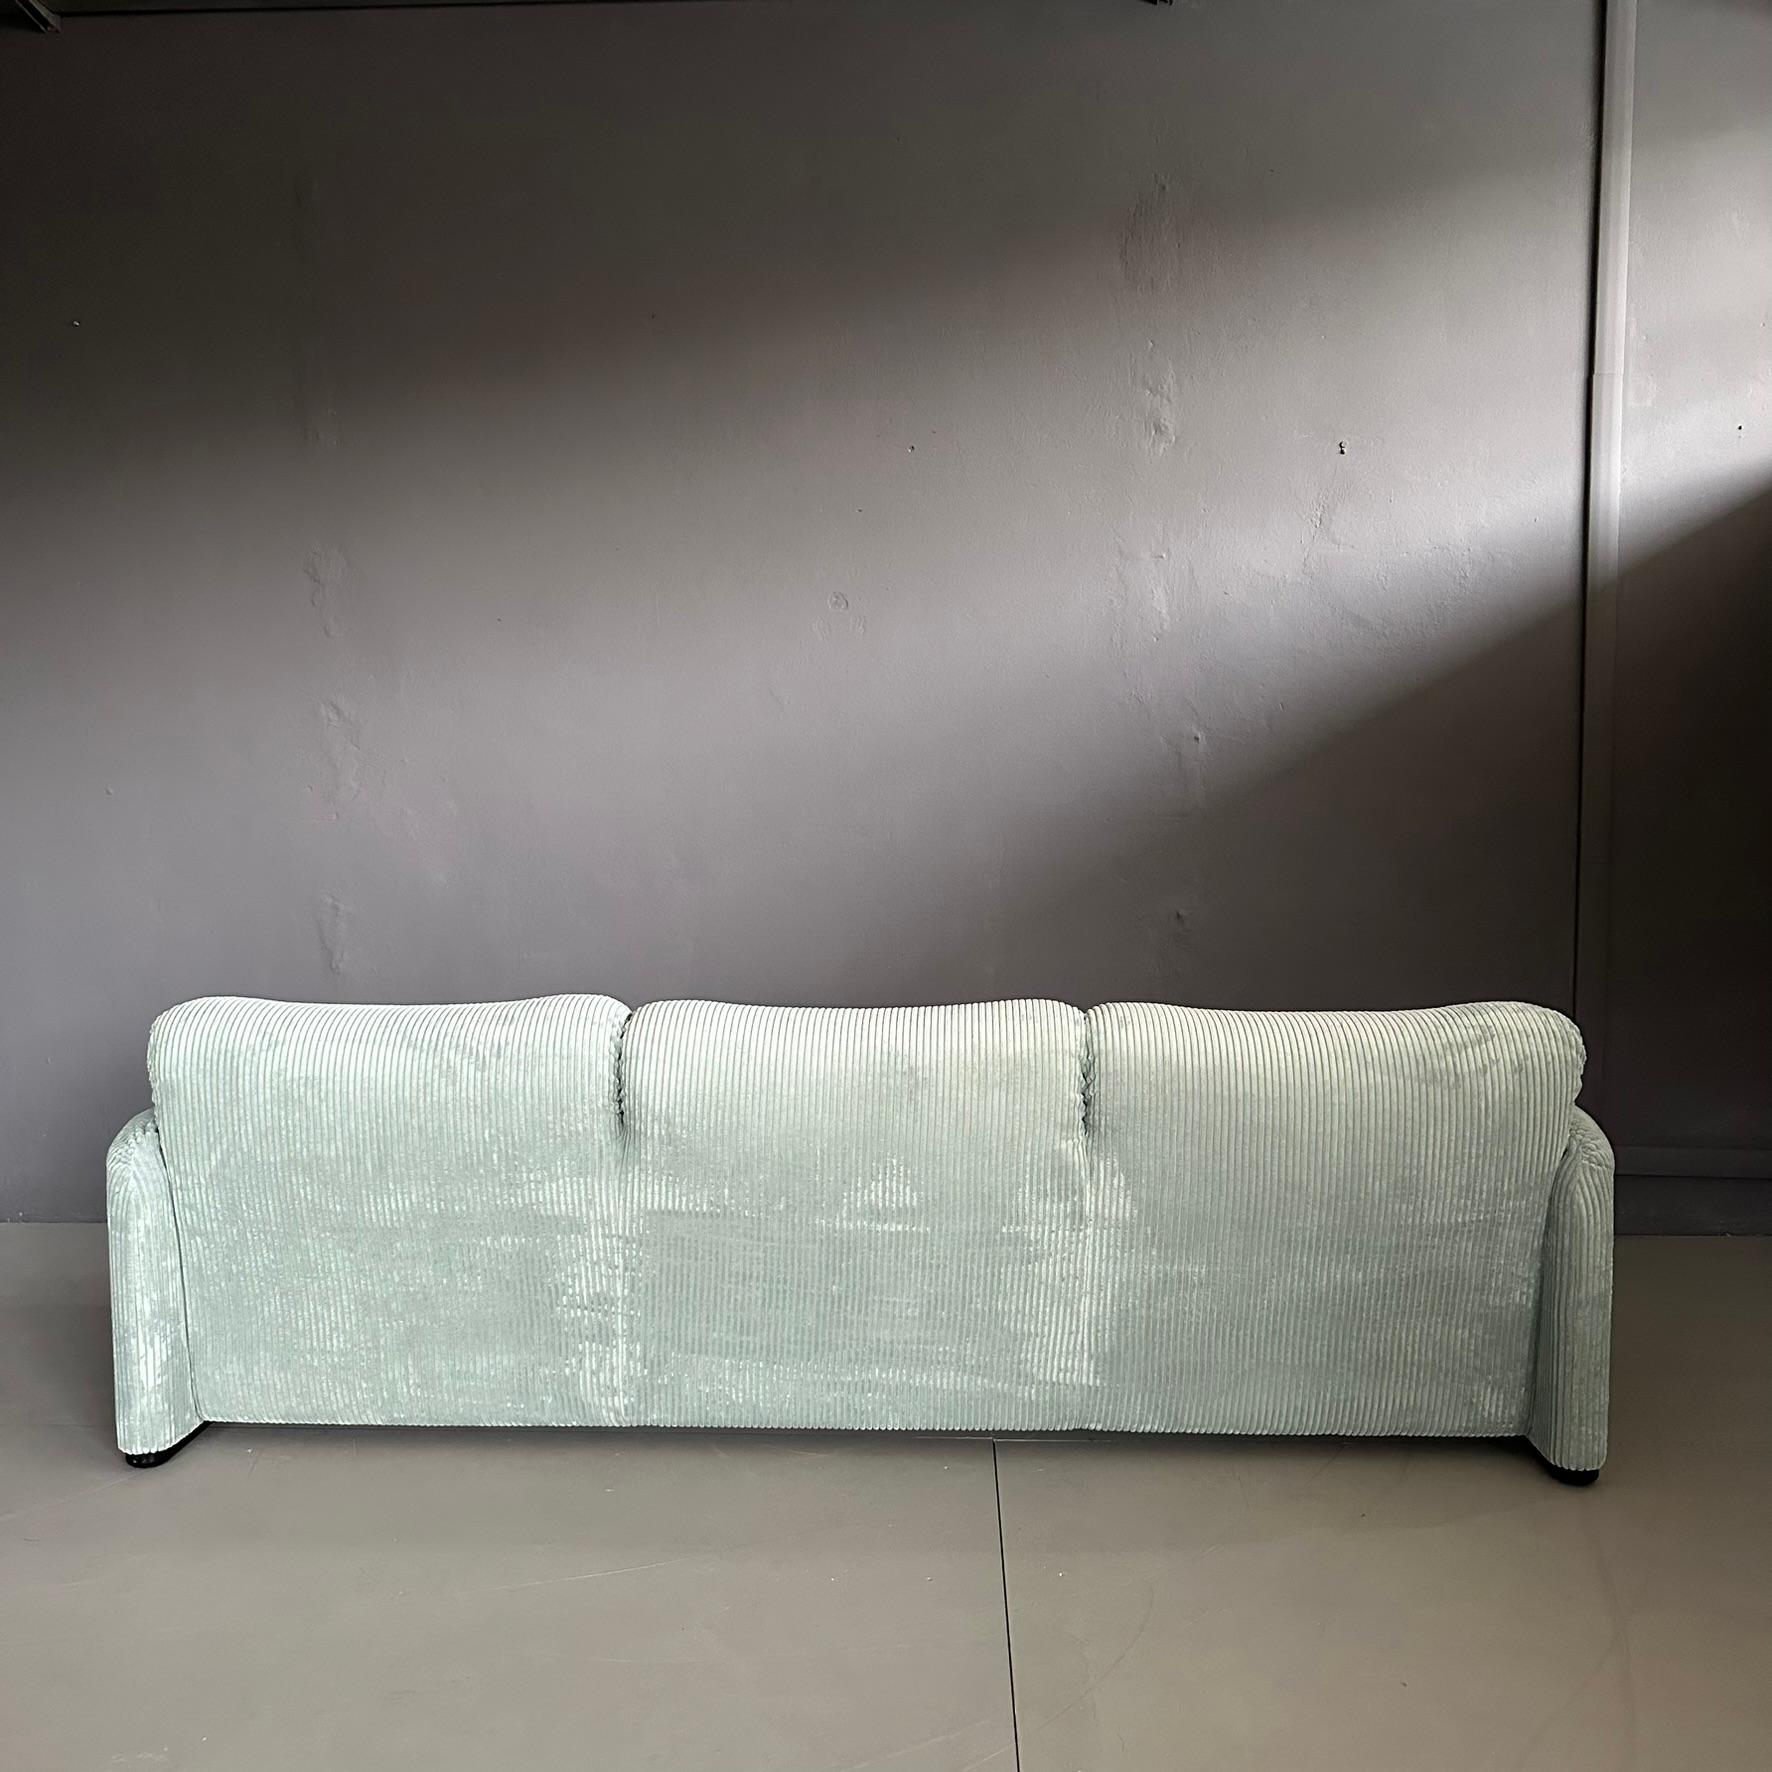 Late 20th Century Pair of Maralunga sofas design by Vico Magistretti for Cassina 2seater - 3seater For Sale